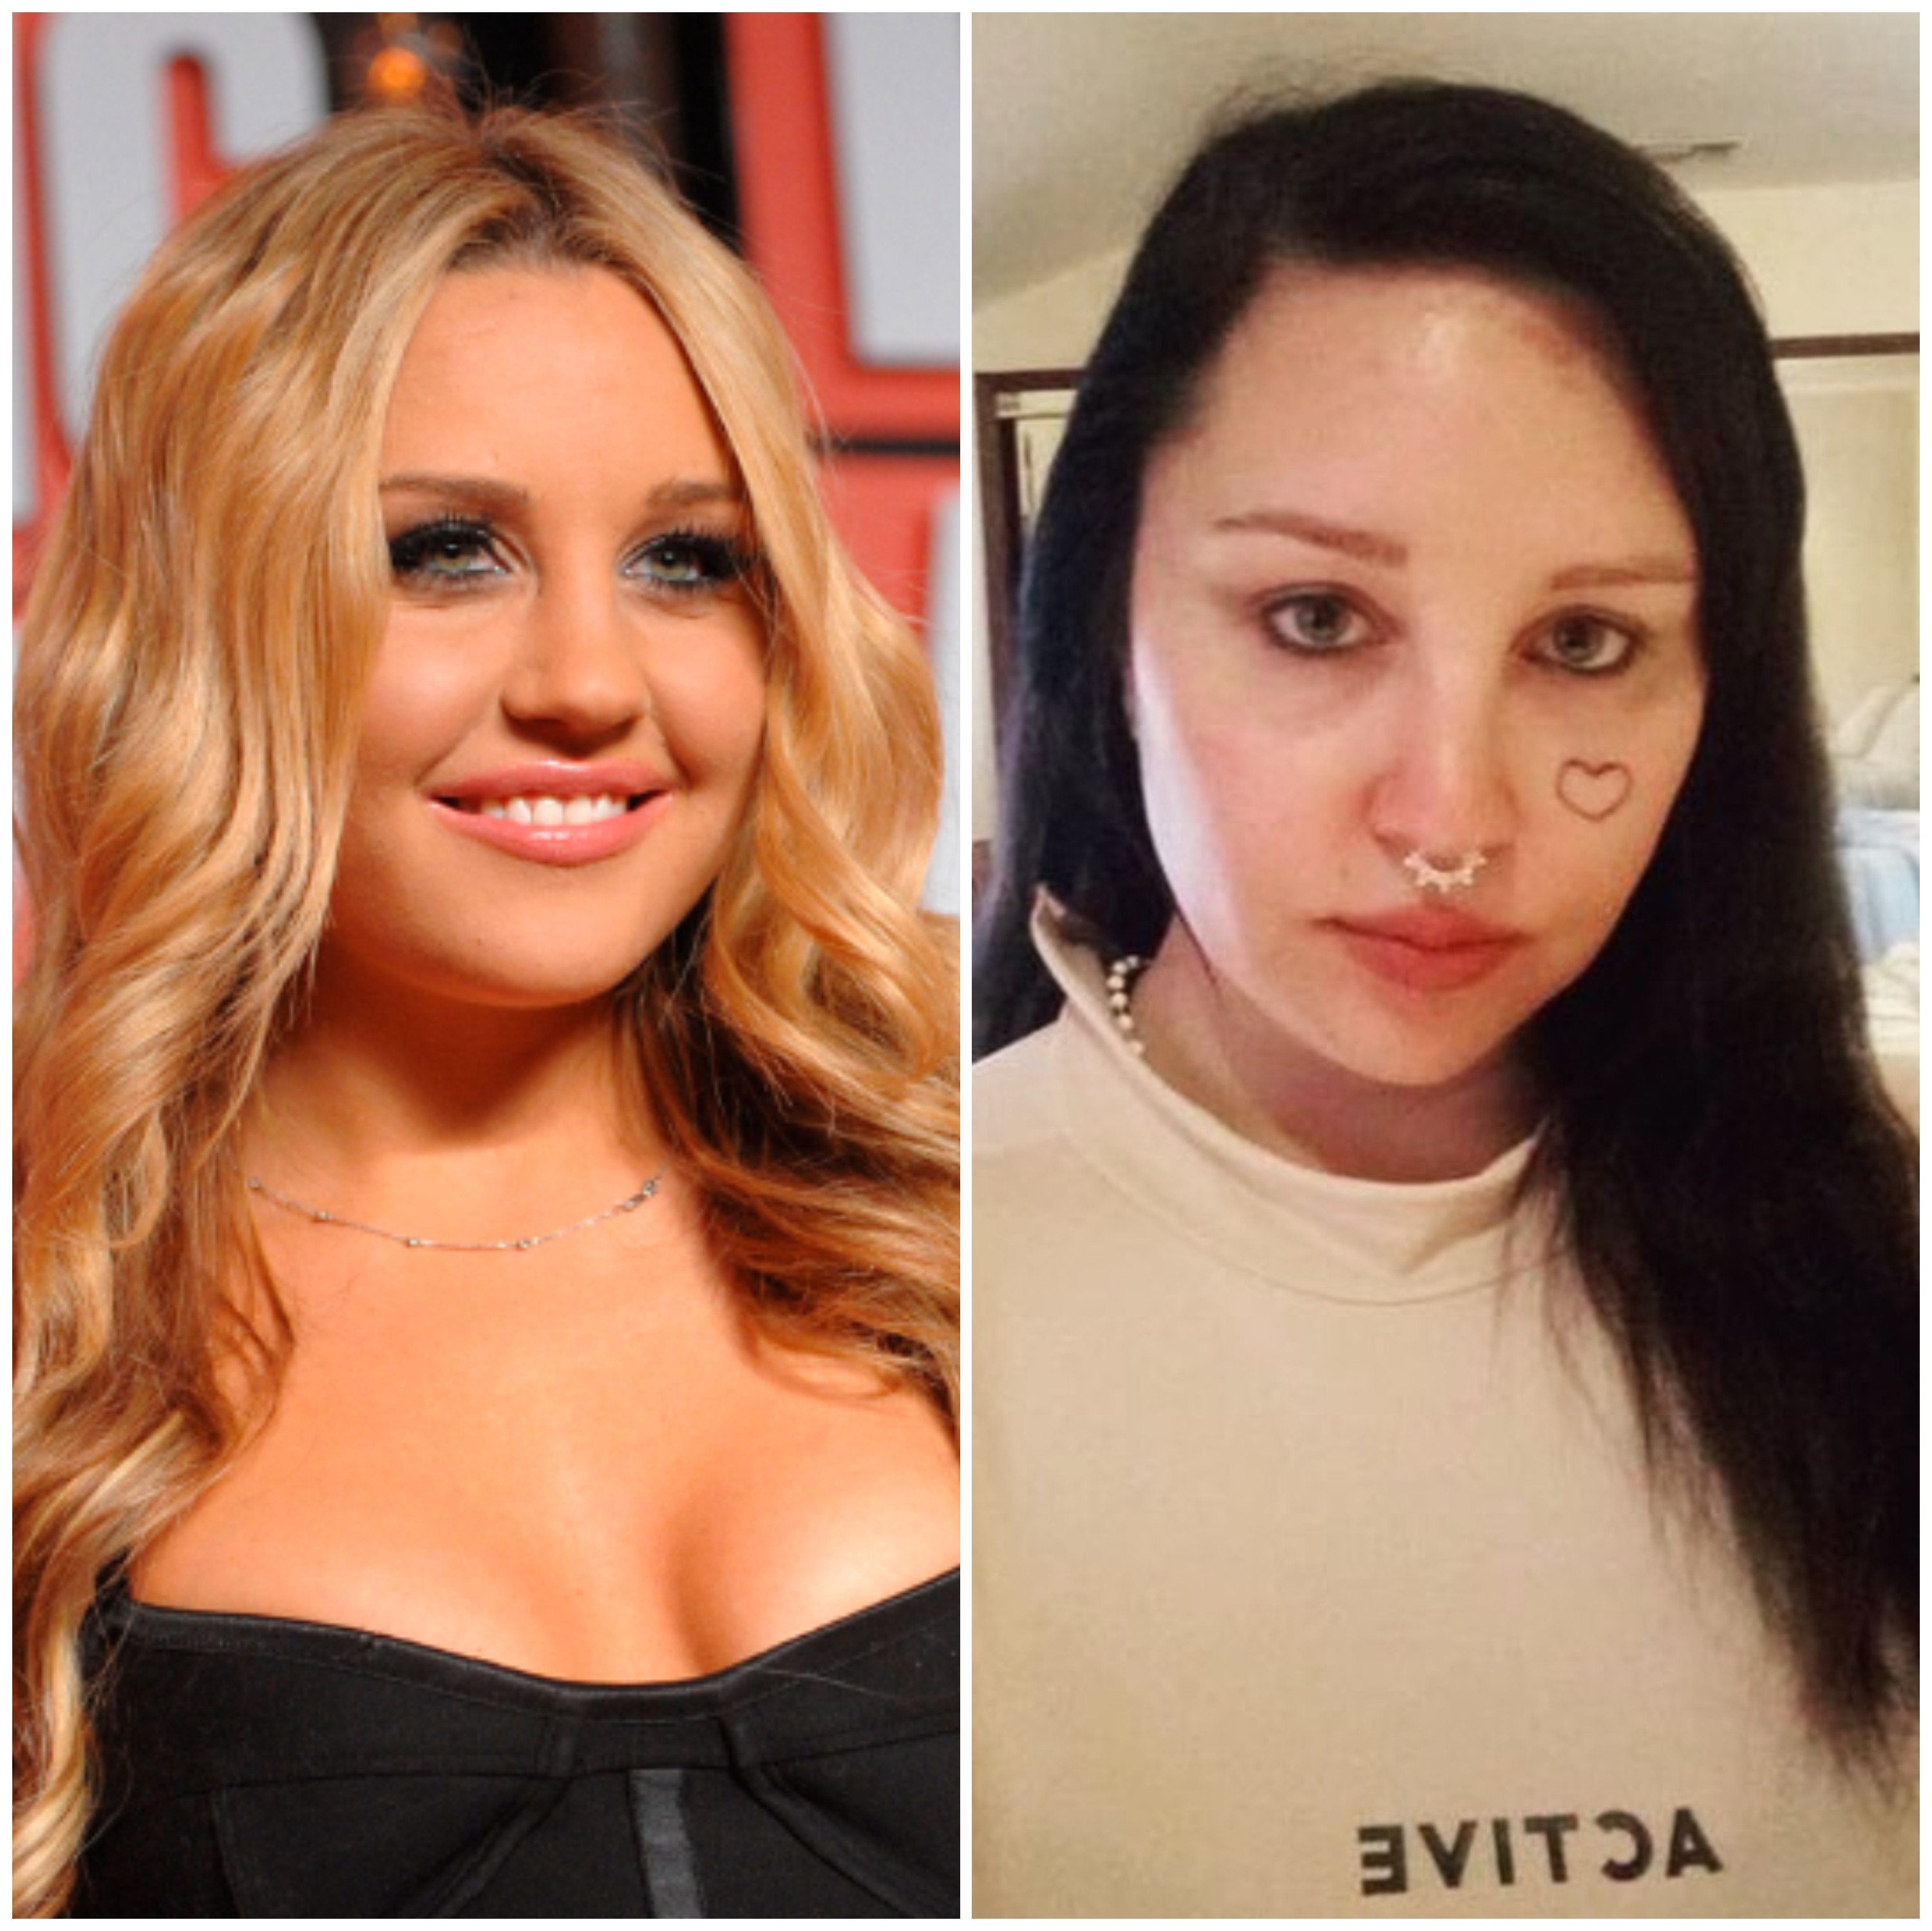 Actress Amanda Bynes has endured mental health struggles over the years, but fans are hoping she’s reached a turning point with her new podcast. Photos: AP, @rlamandabynes/Instagram